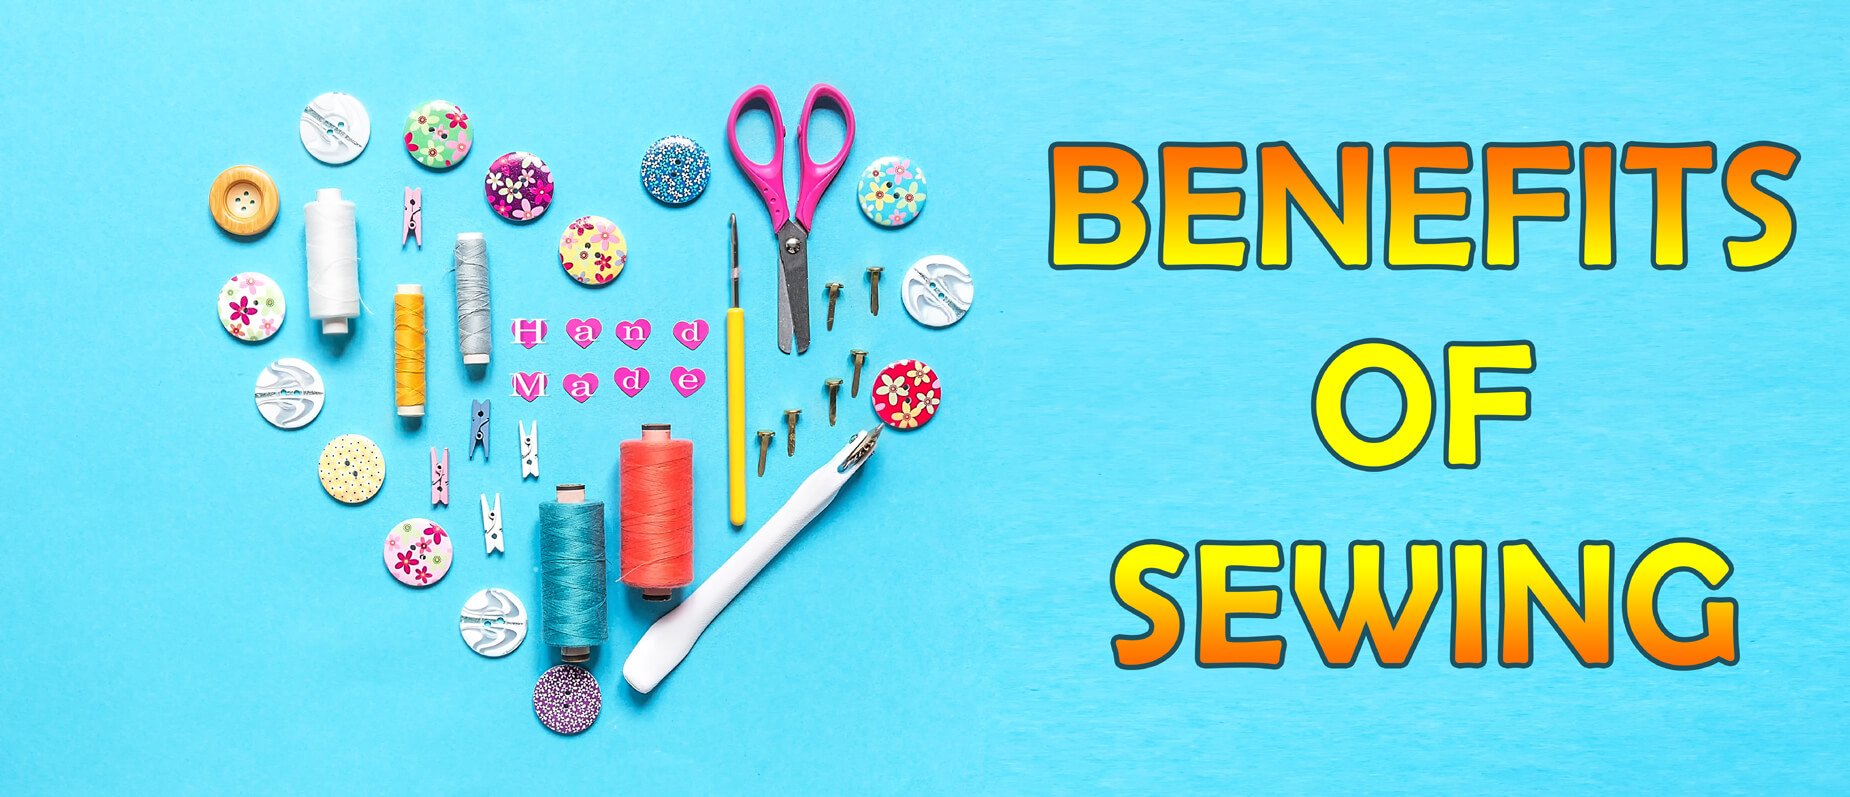 5 Health Benefits of Sewing